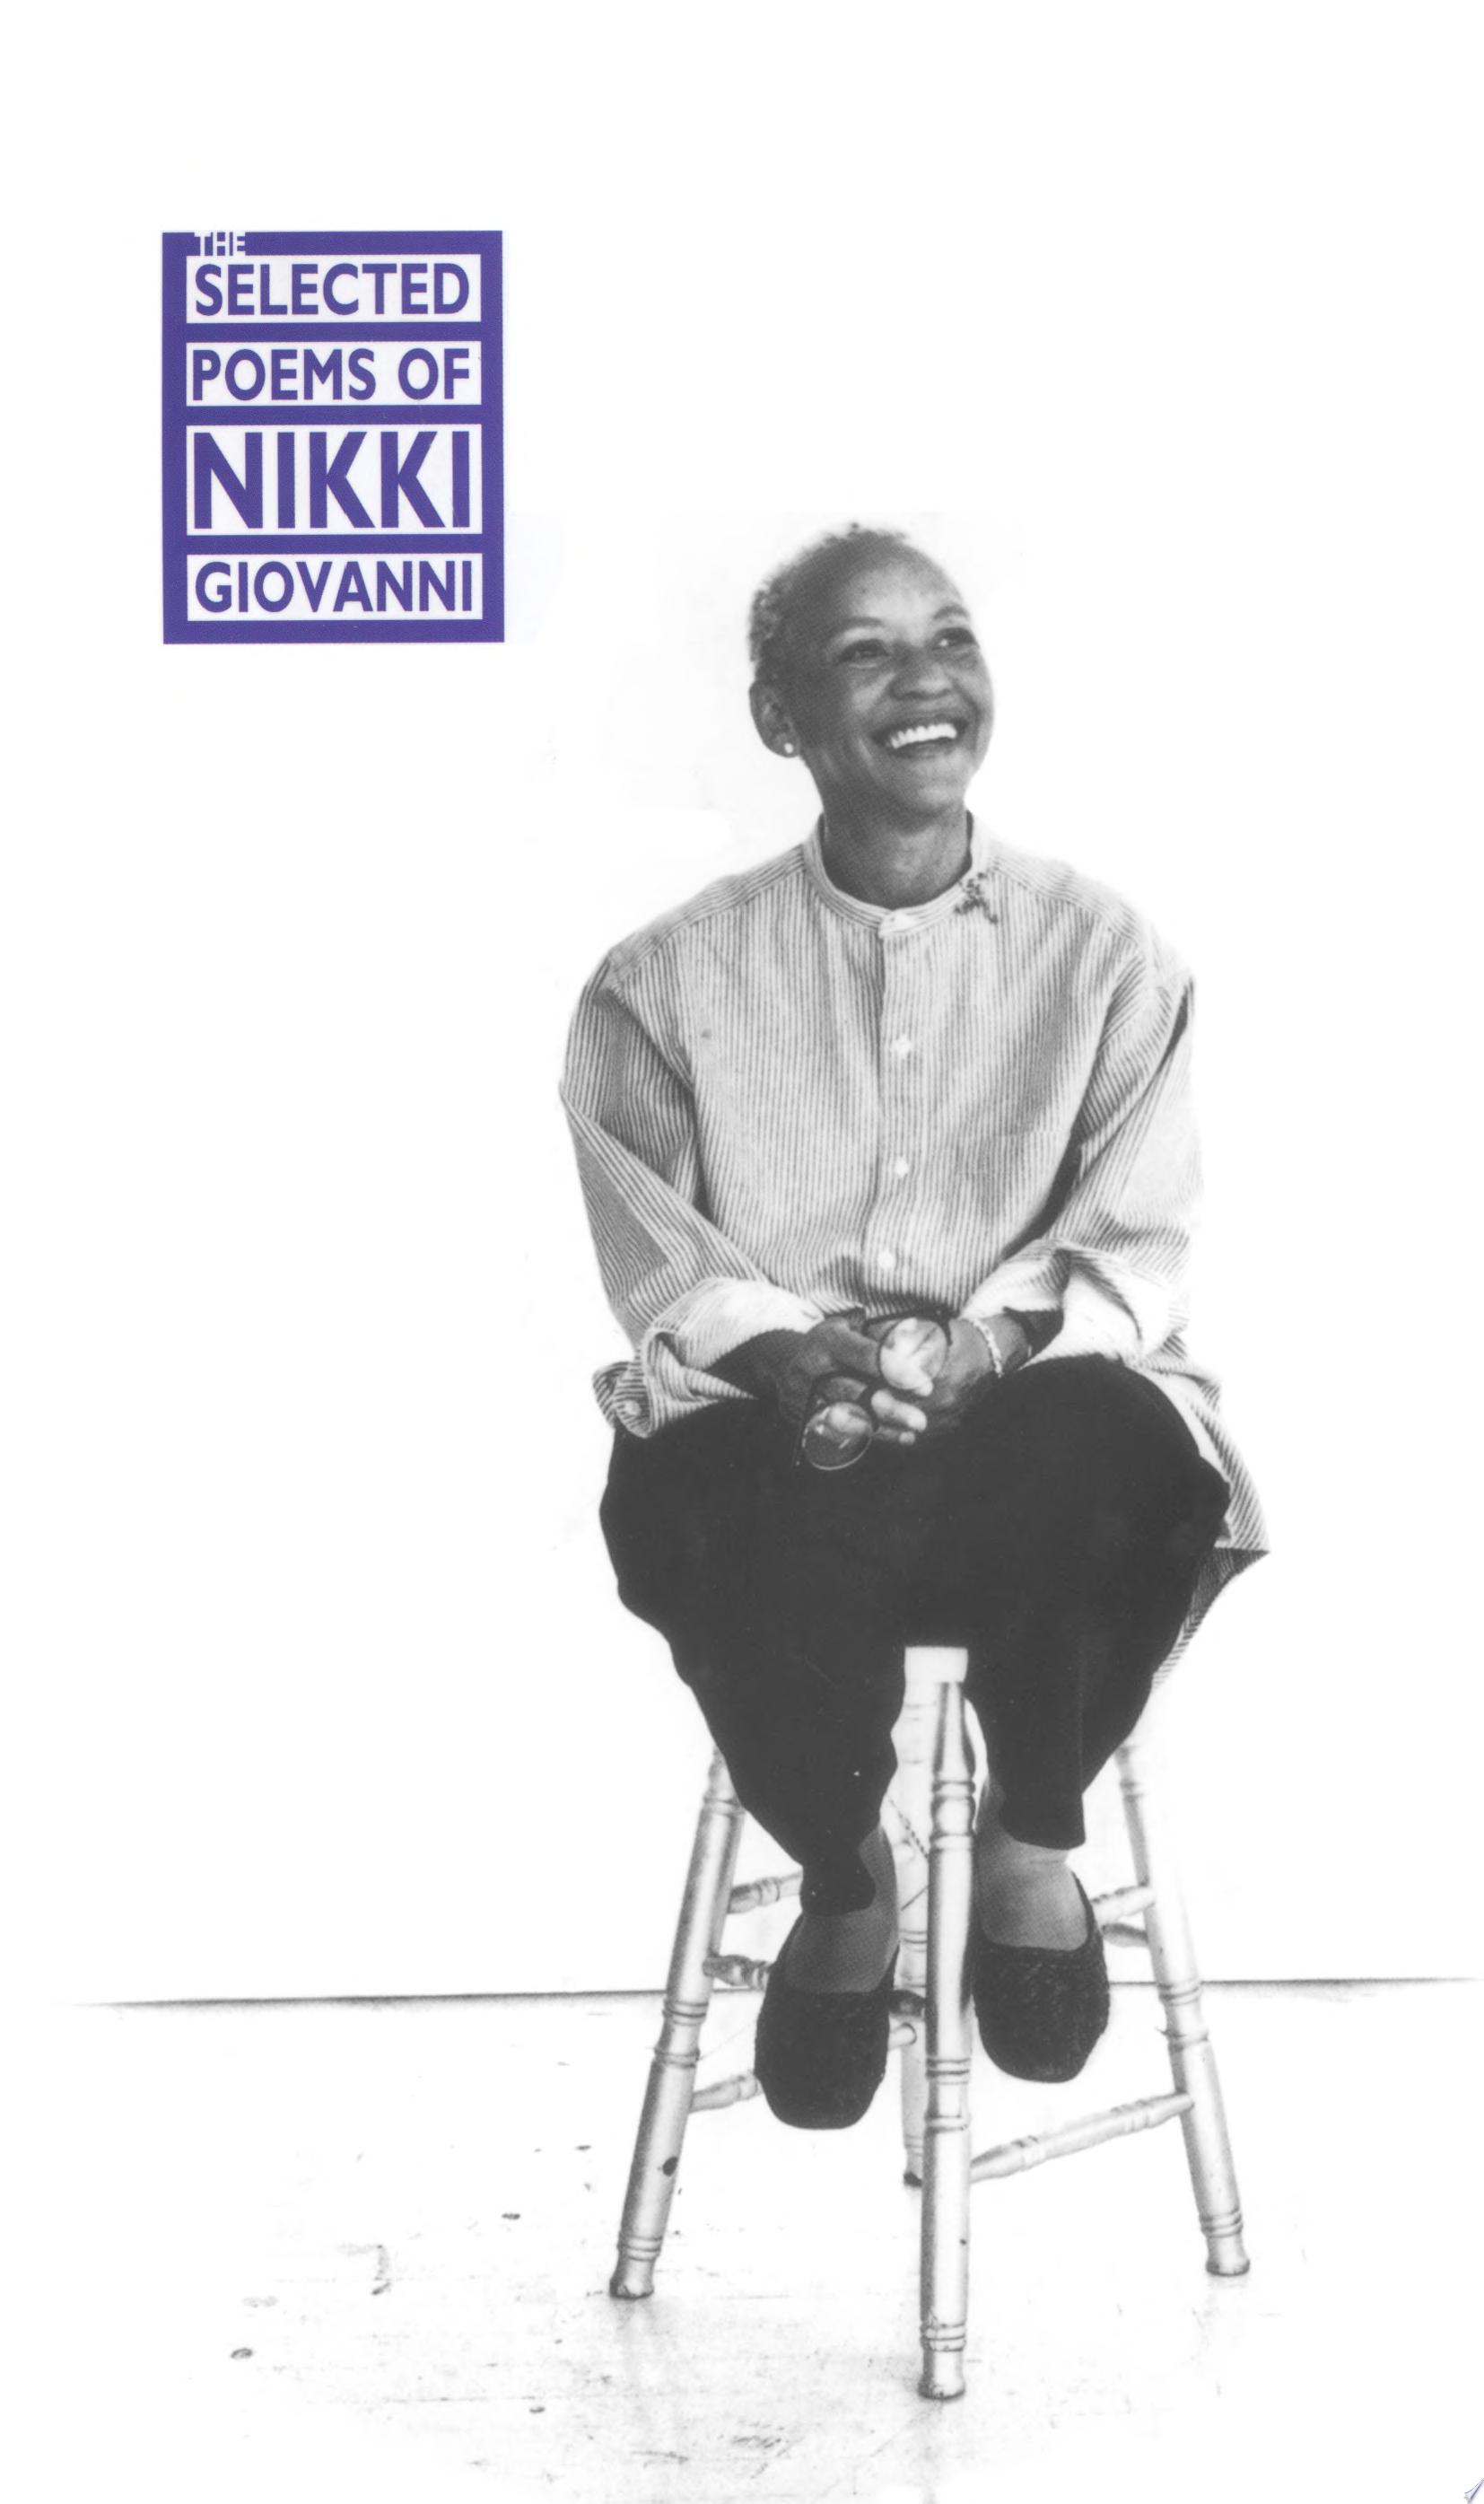 Image for "The Selected Poems of Nikki Giovanni"